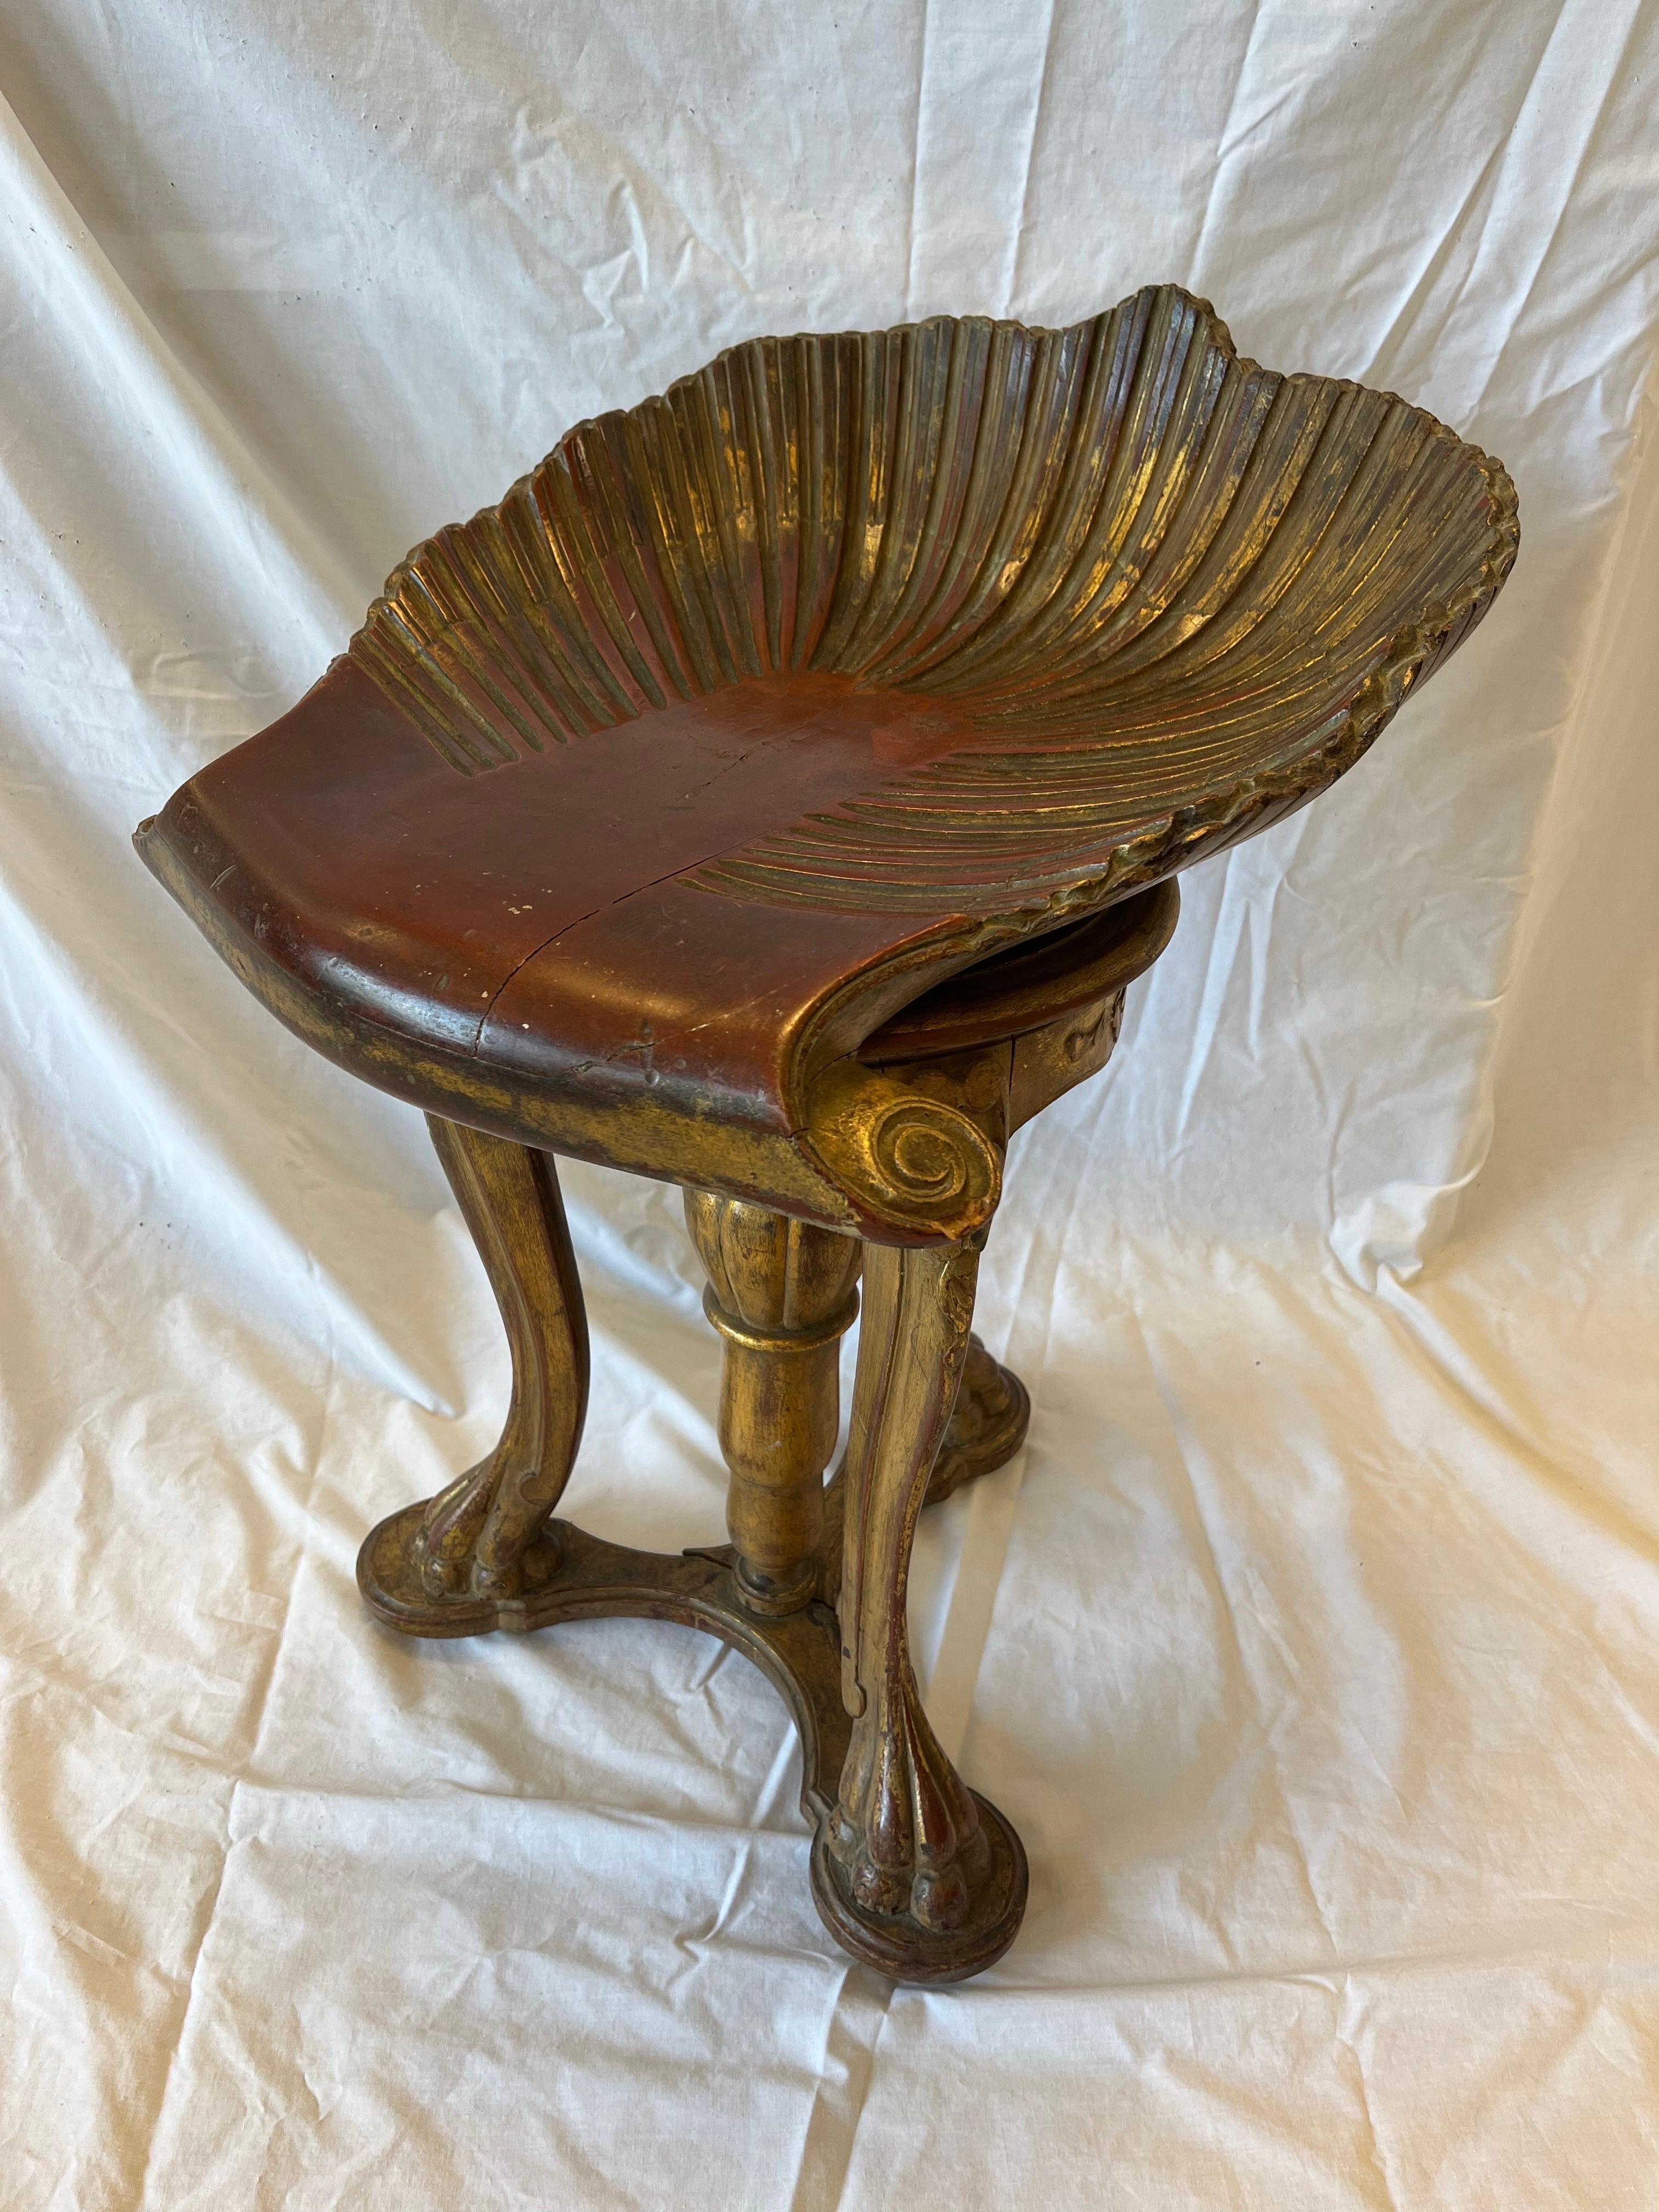 An antique late 19th or early 20th century Ventian Italian grotto style carved and gilt and polychromed shell stool. This piano stool, or a stand alone stool as a piece of furniture in your home, exhibits beautiful character and wear. The red bole